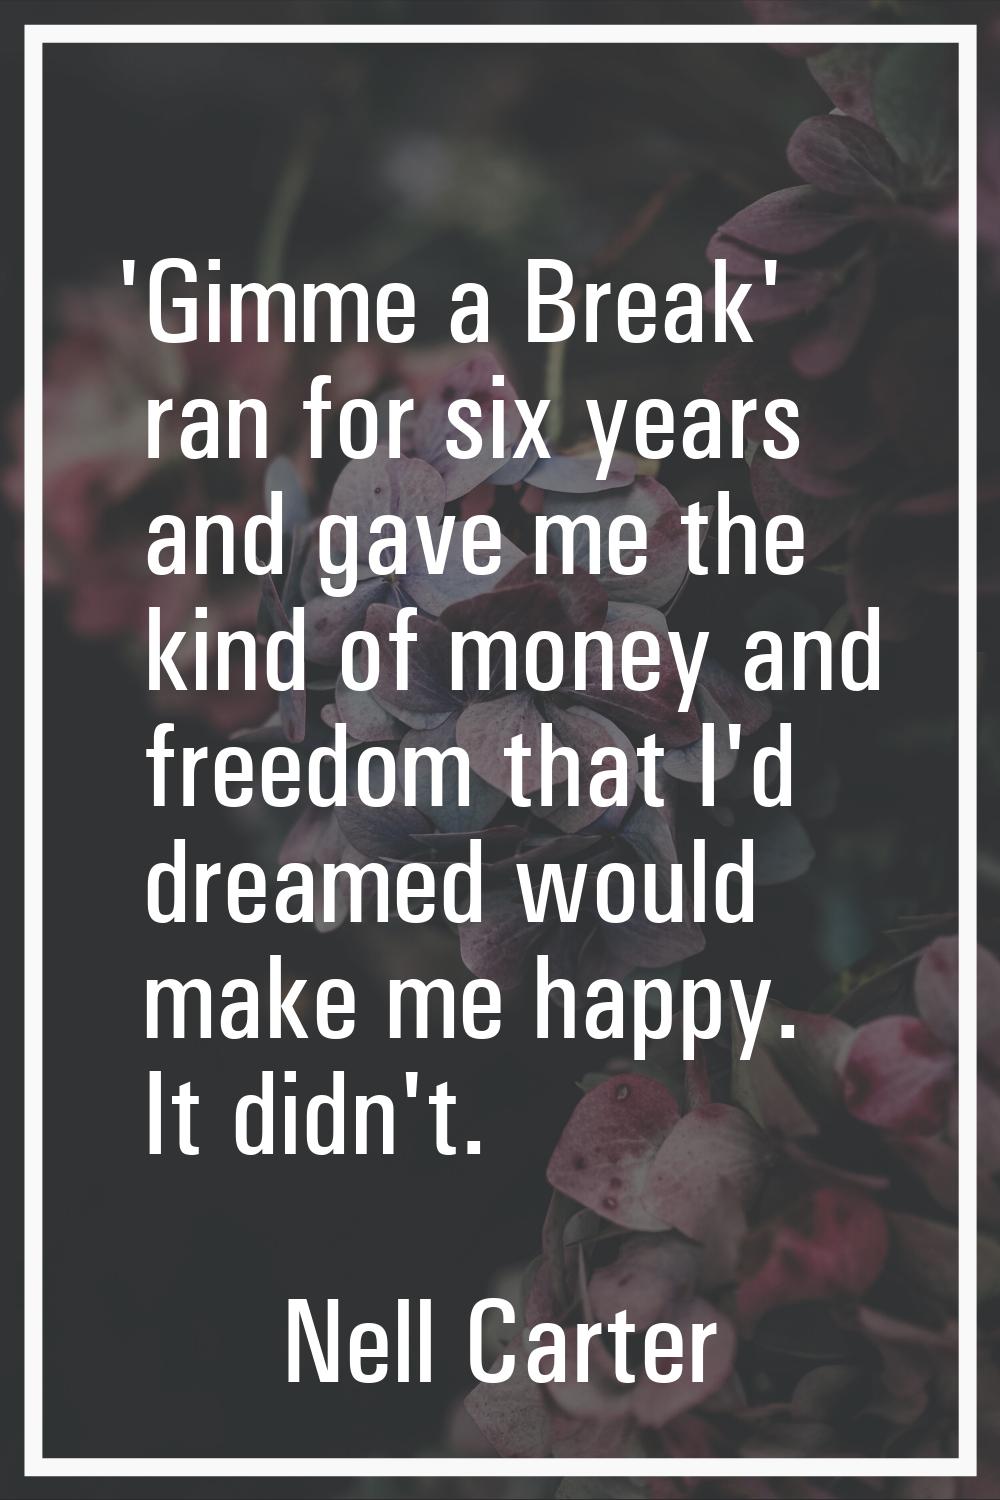 'Gimme a Break' ran for six years and gave me the kind of money and freedom that I'd dreamed would 